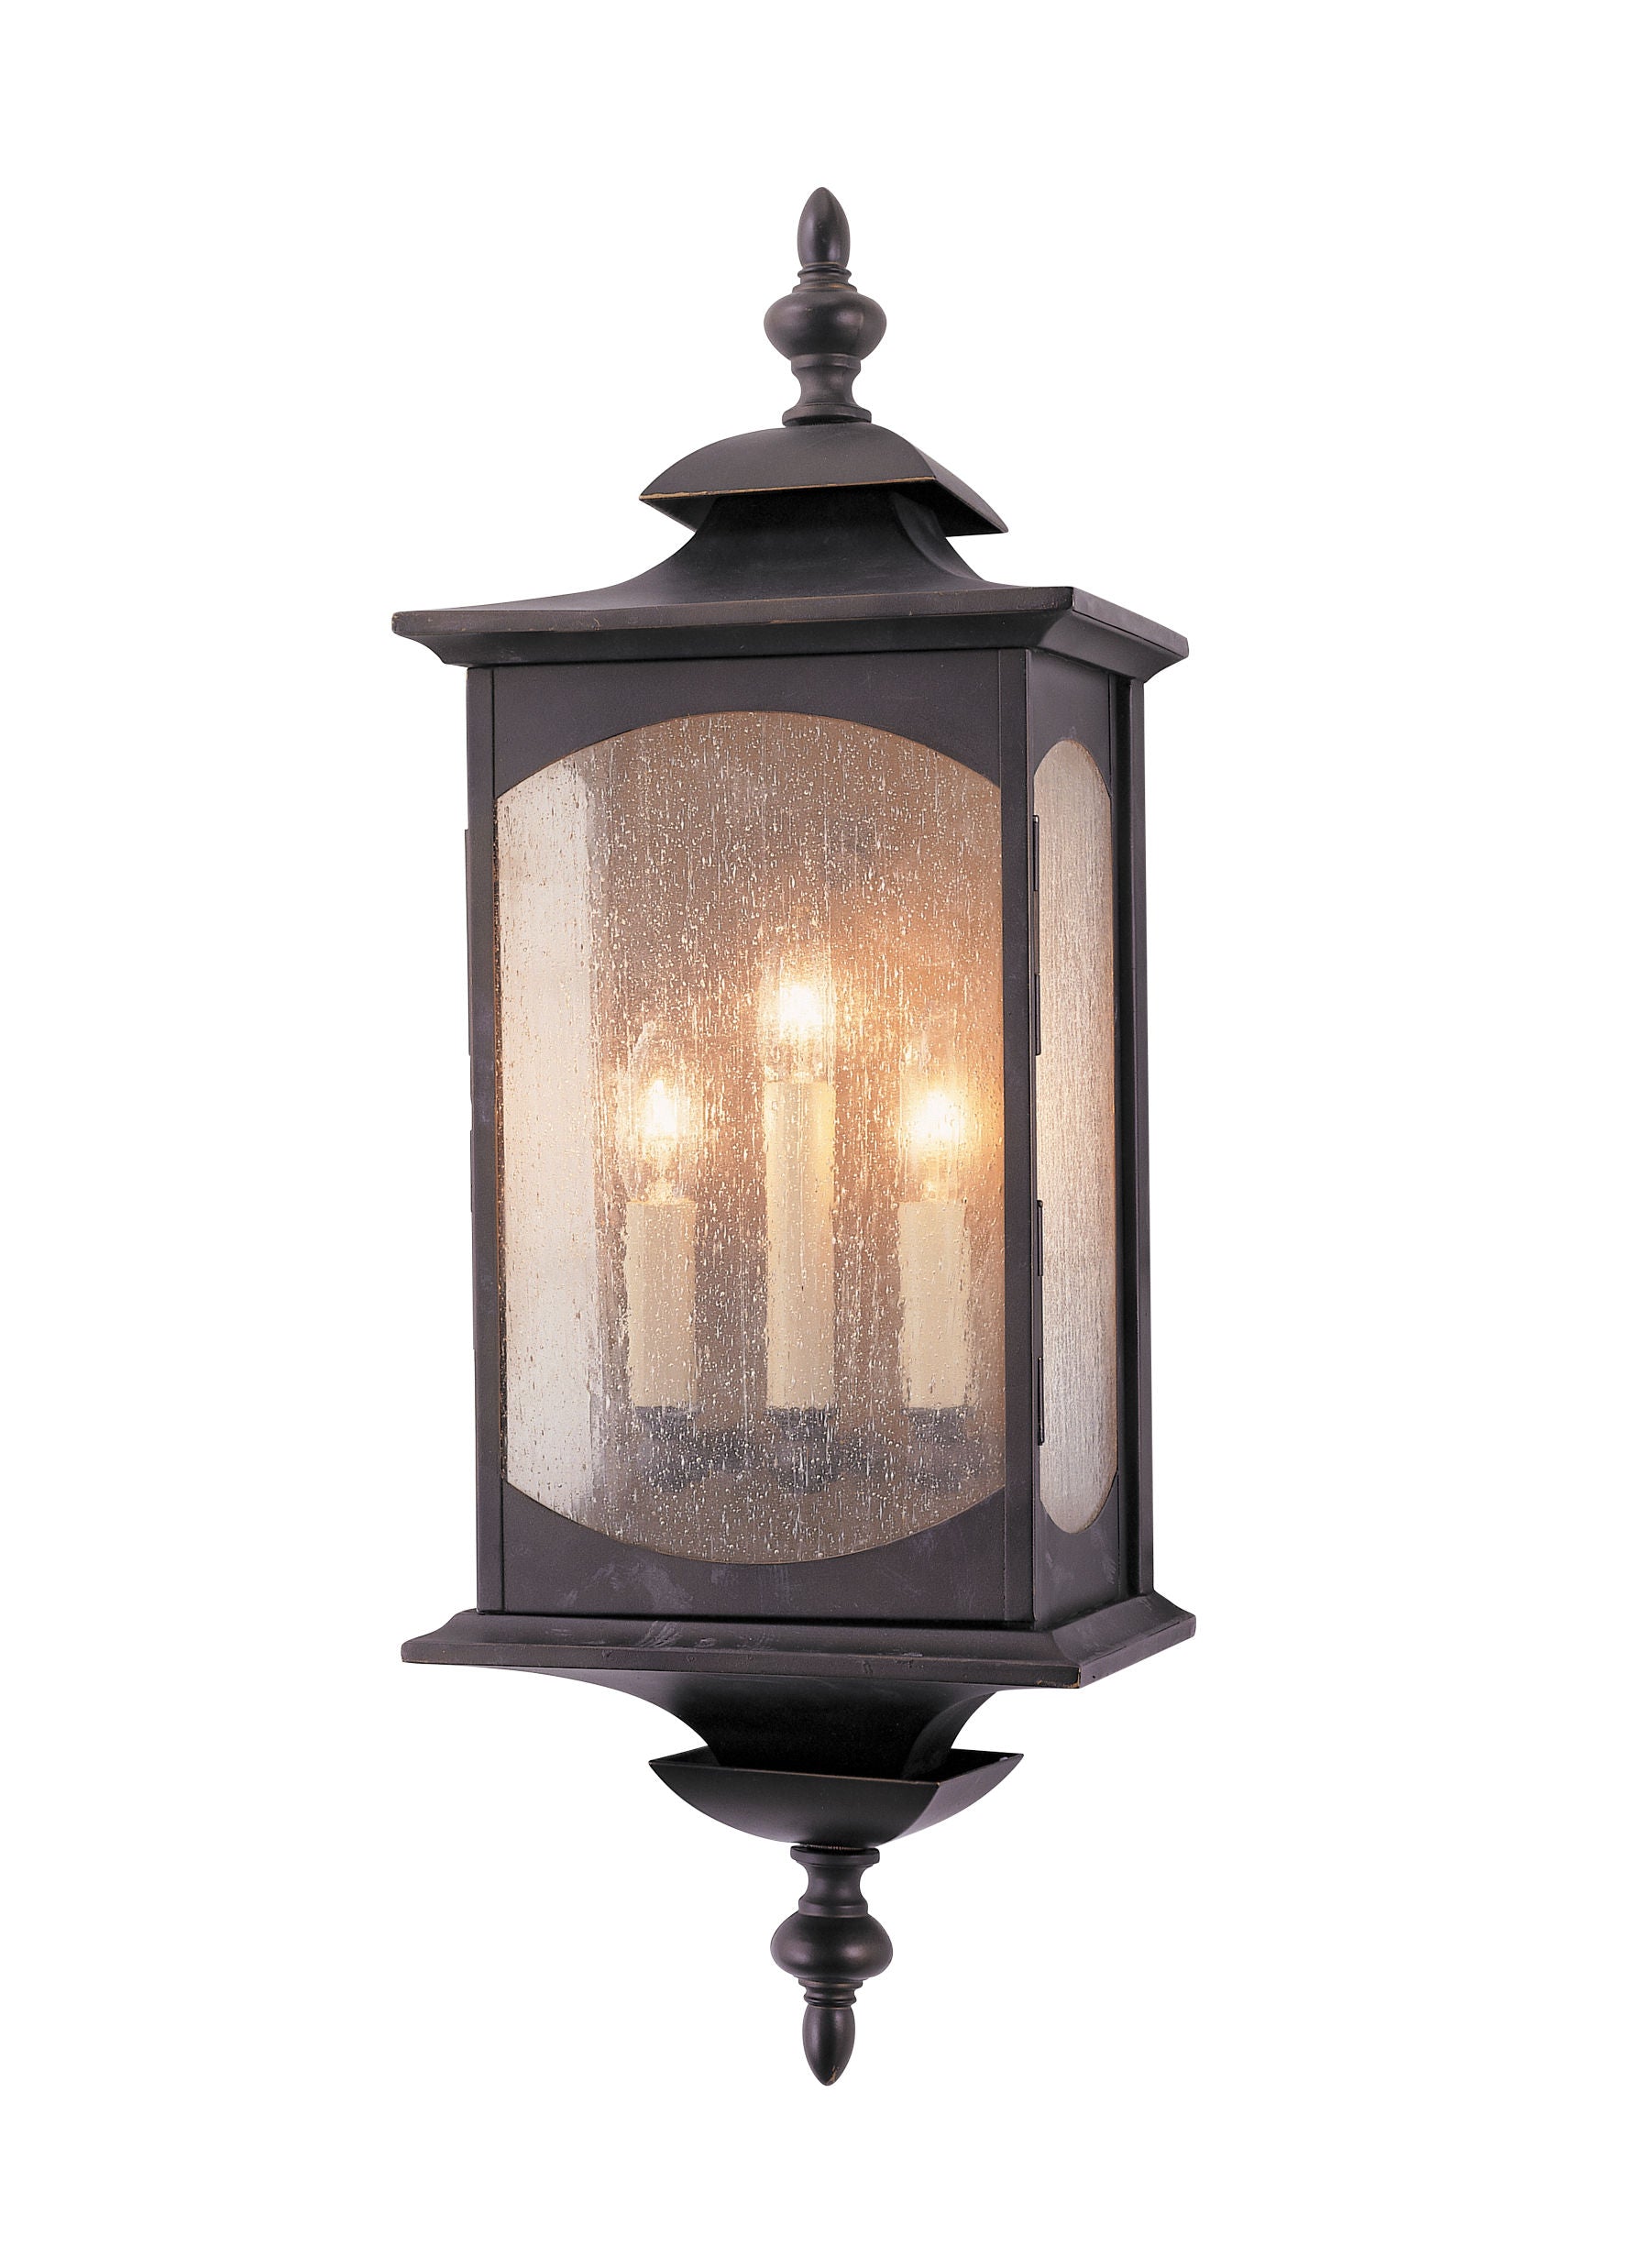 Market Square Outdoor sconce Bronze - OL2602ORB | FEISS